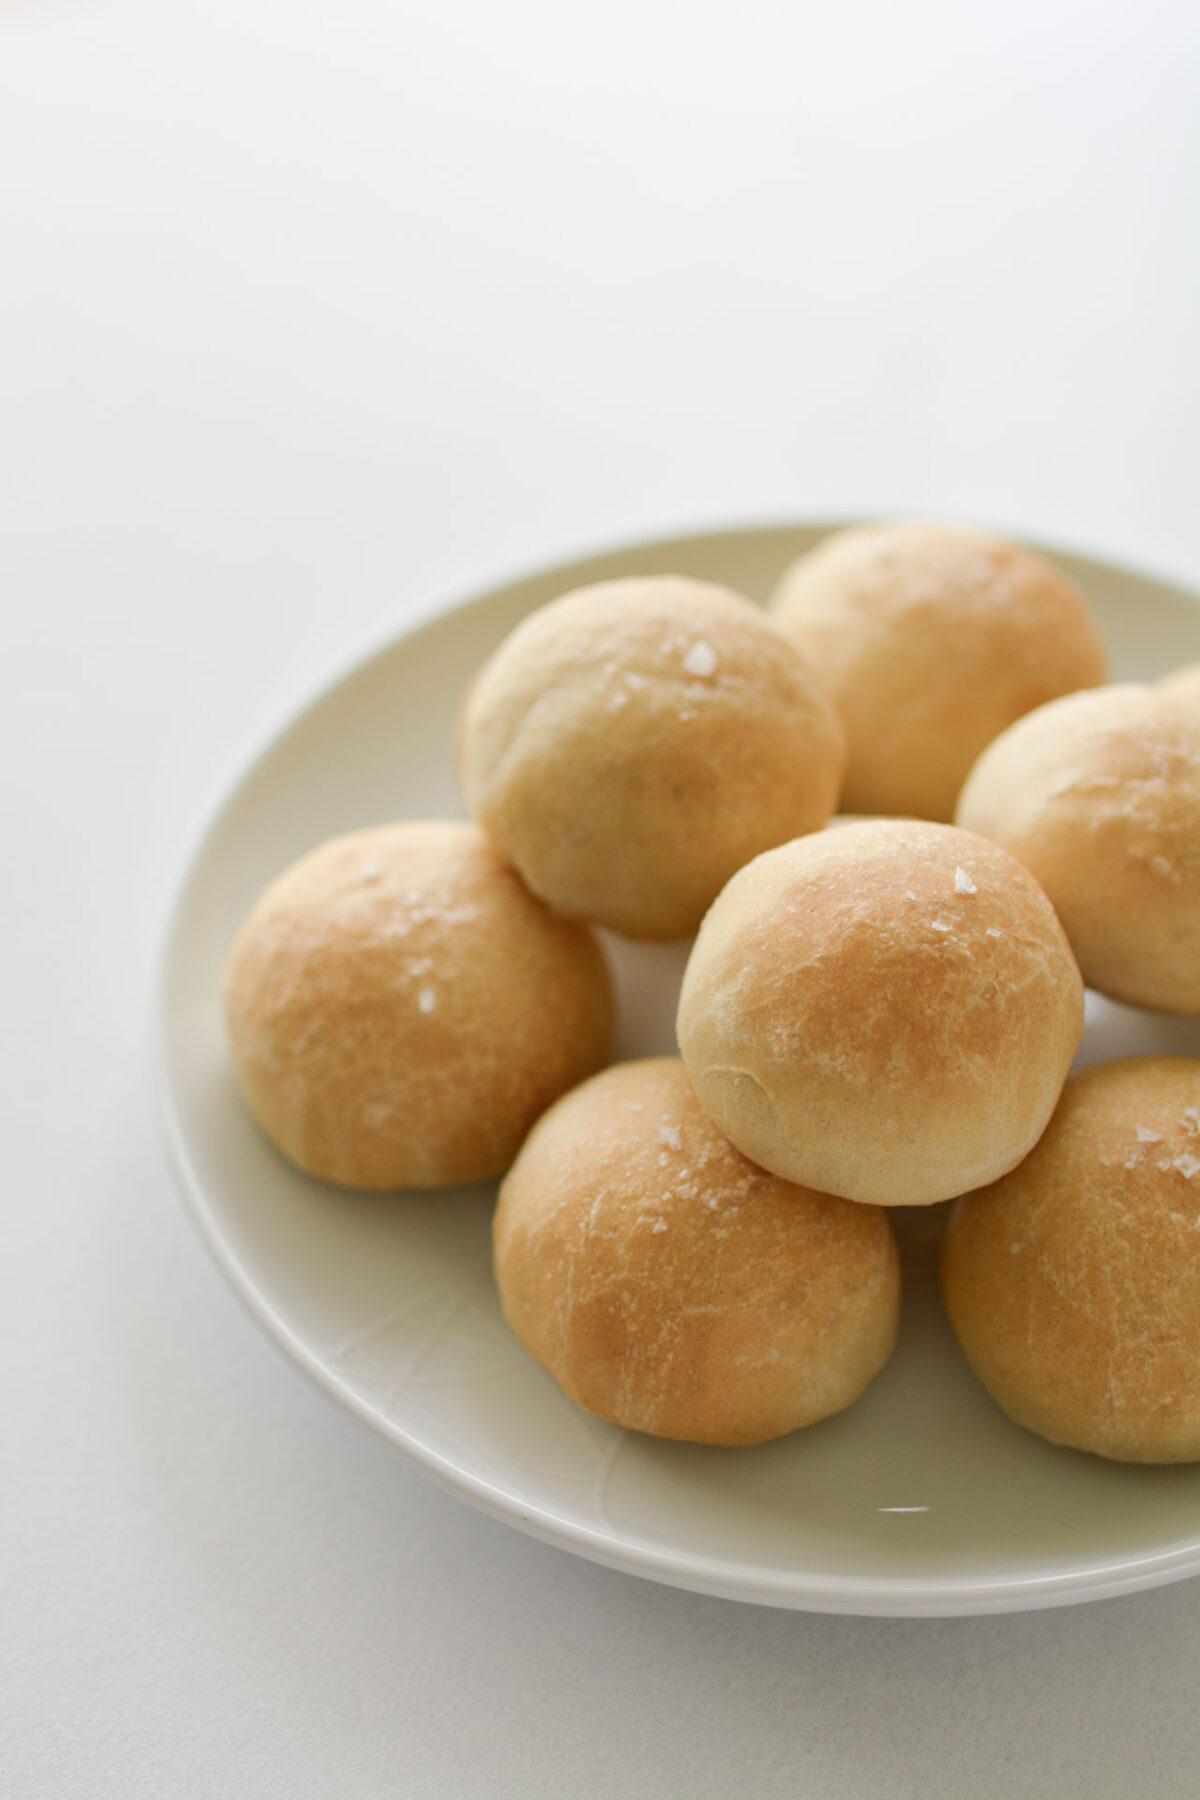 A close up image of a plate containing freshly bake doughballs.